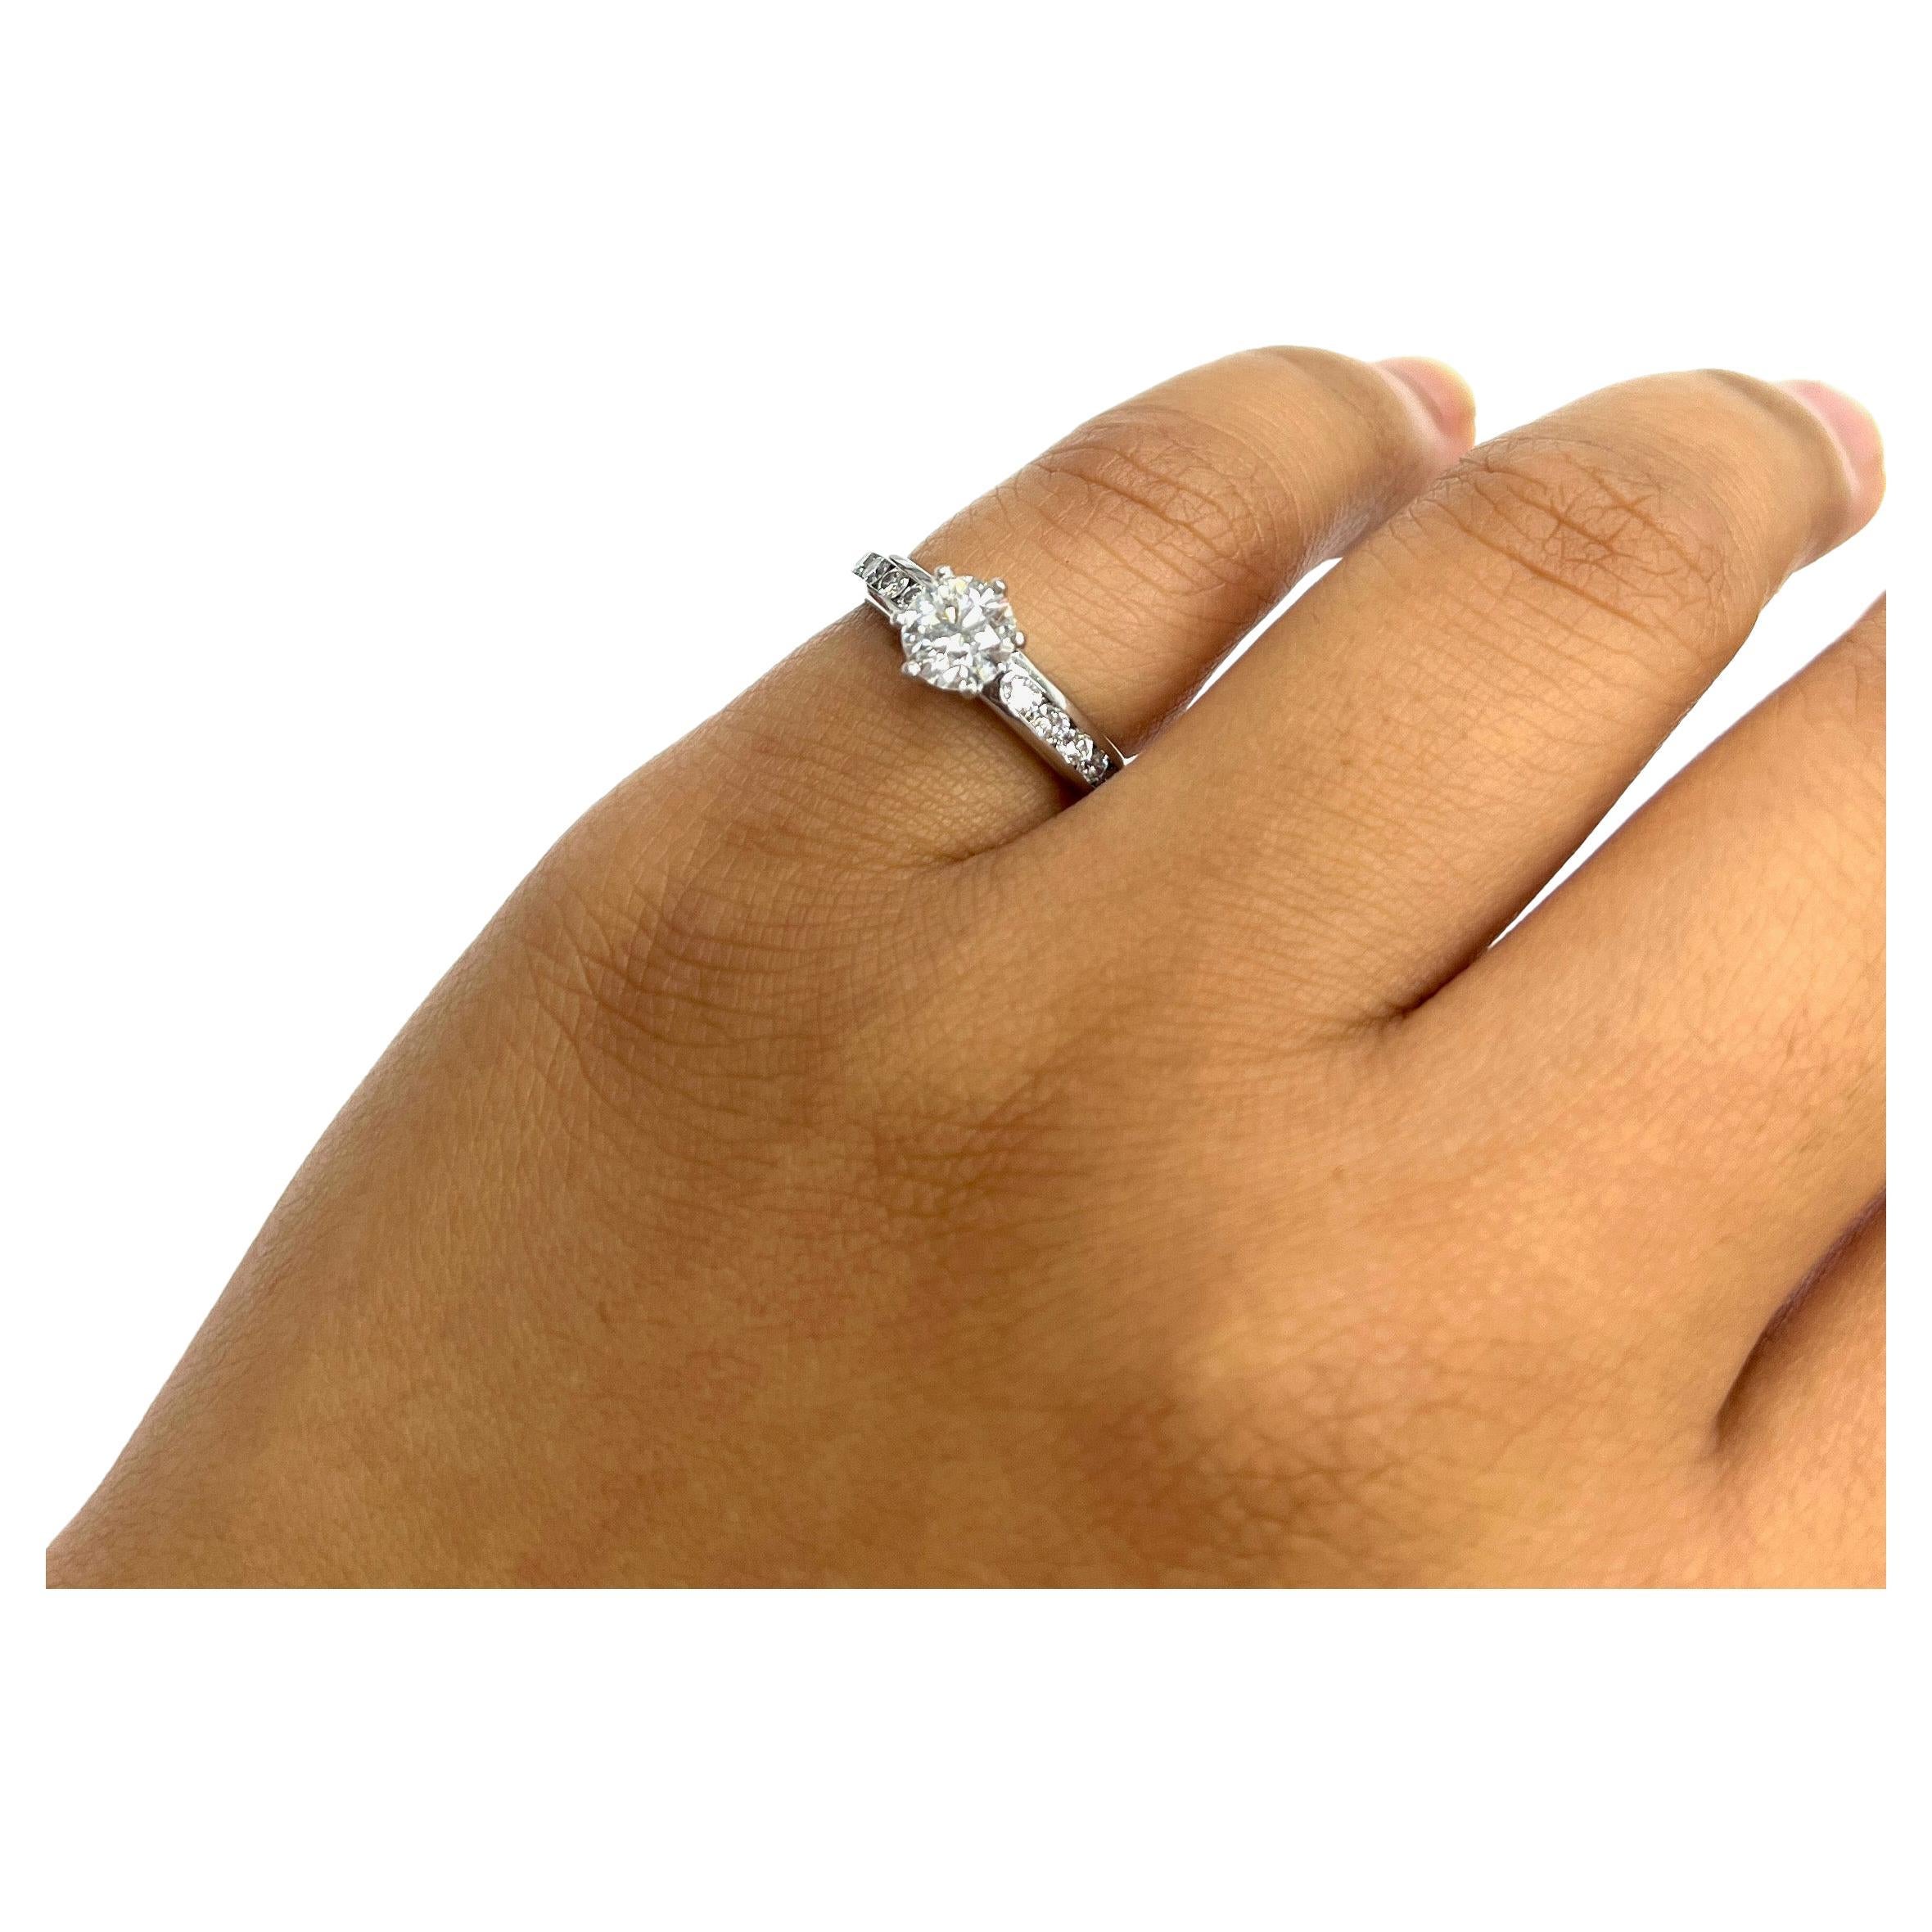 Tiffany & Co. 0.77 Carat Diamond Solitaire Engagement Ring For Sale 9